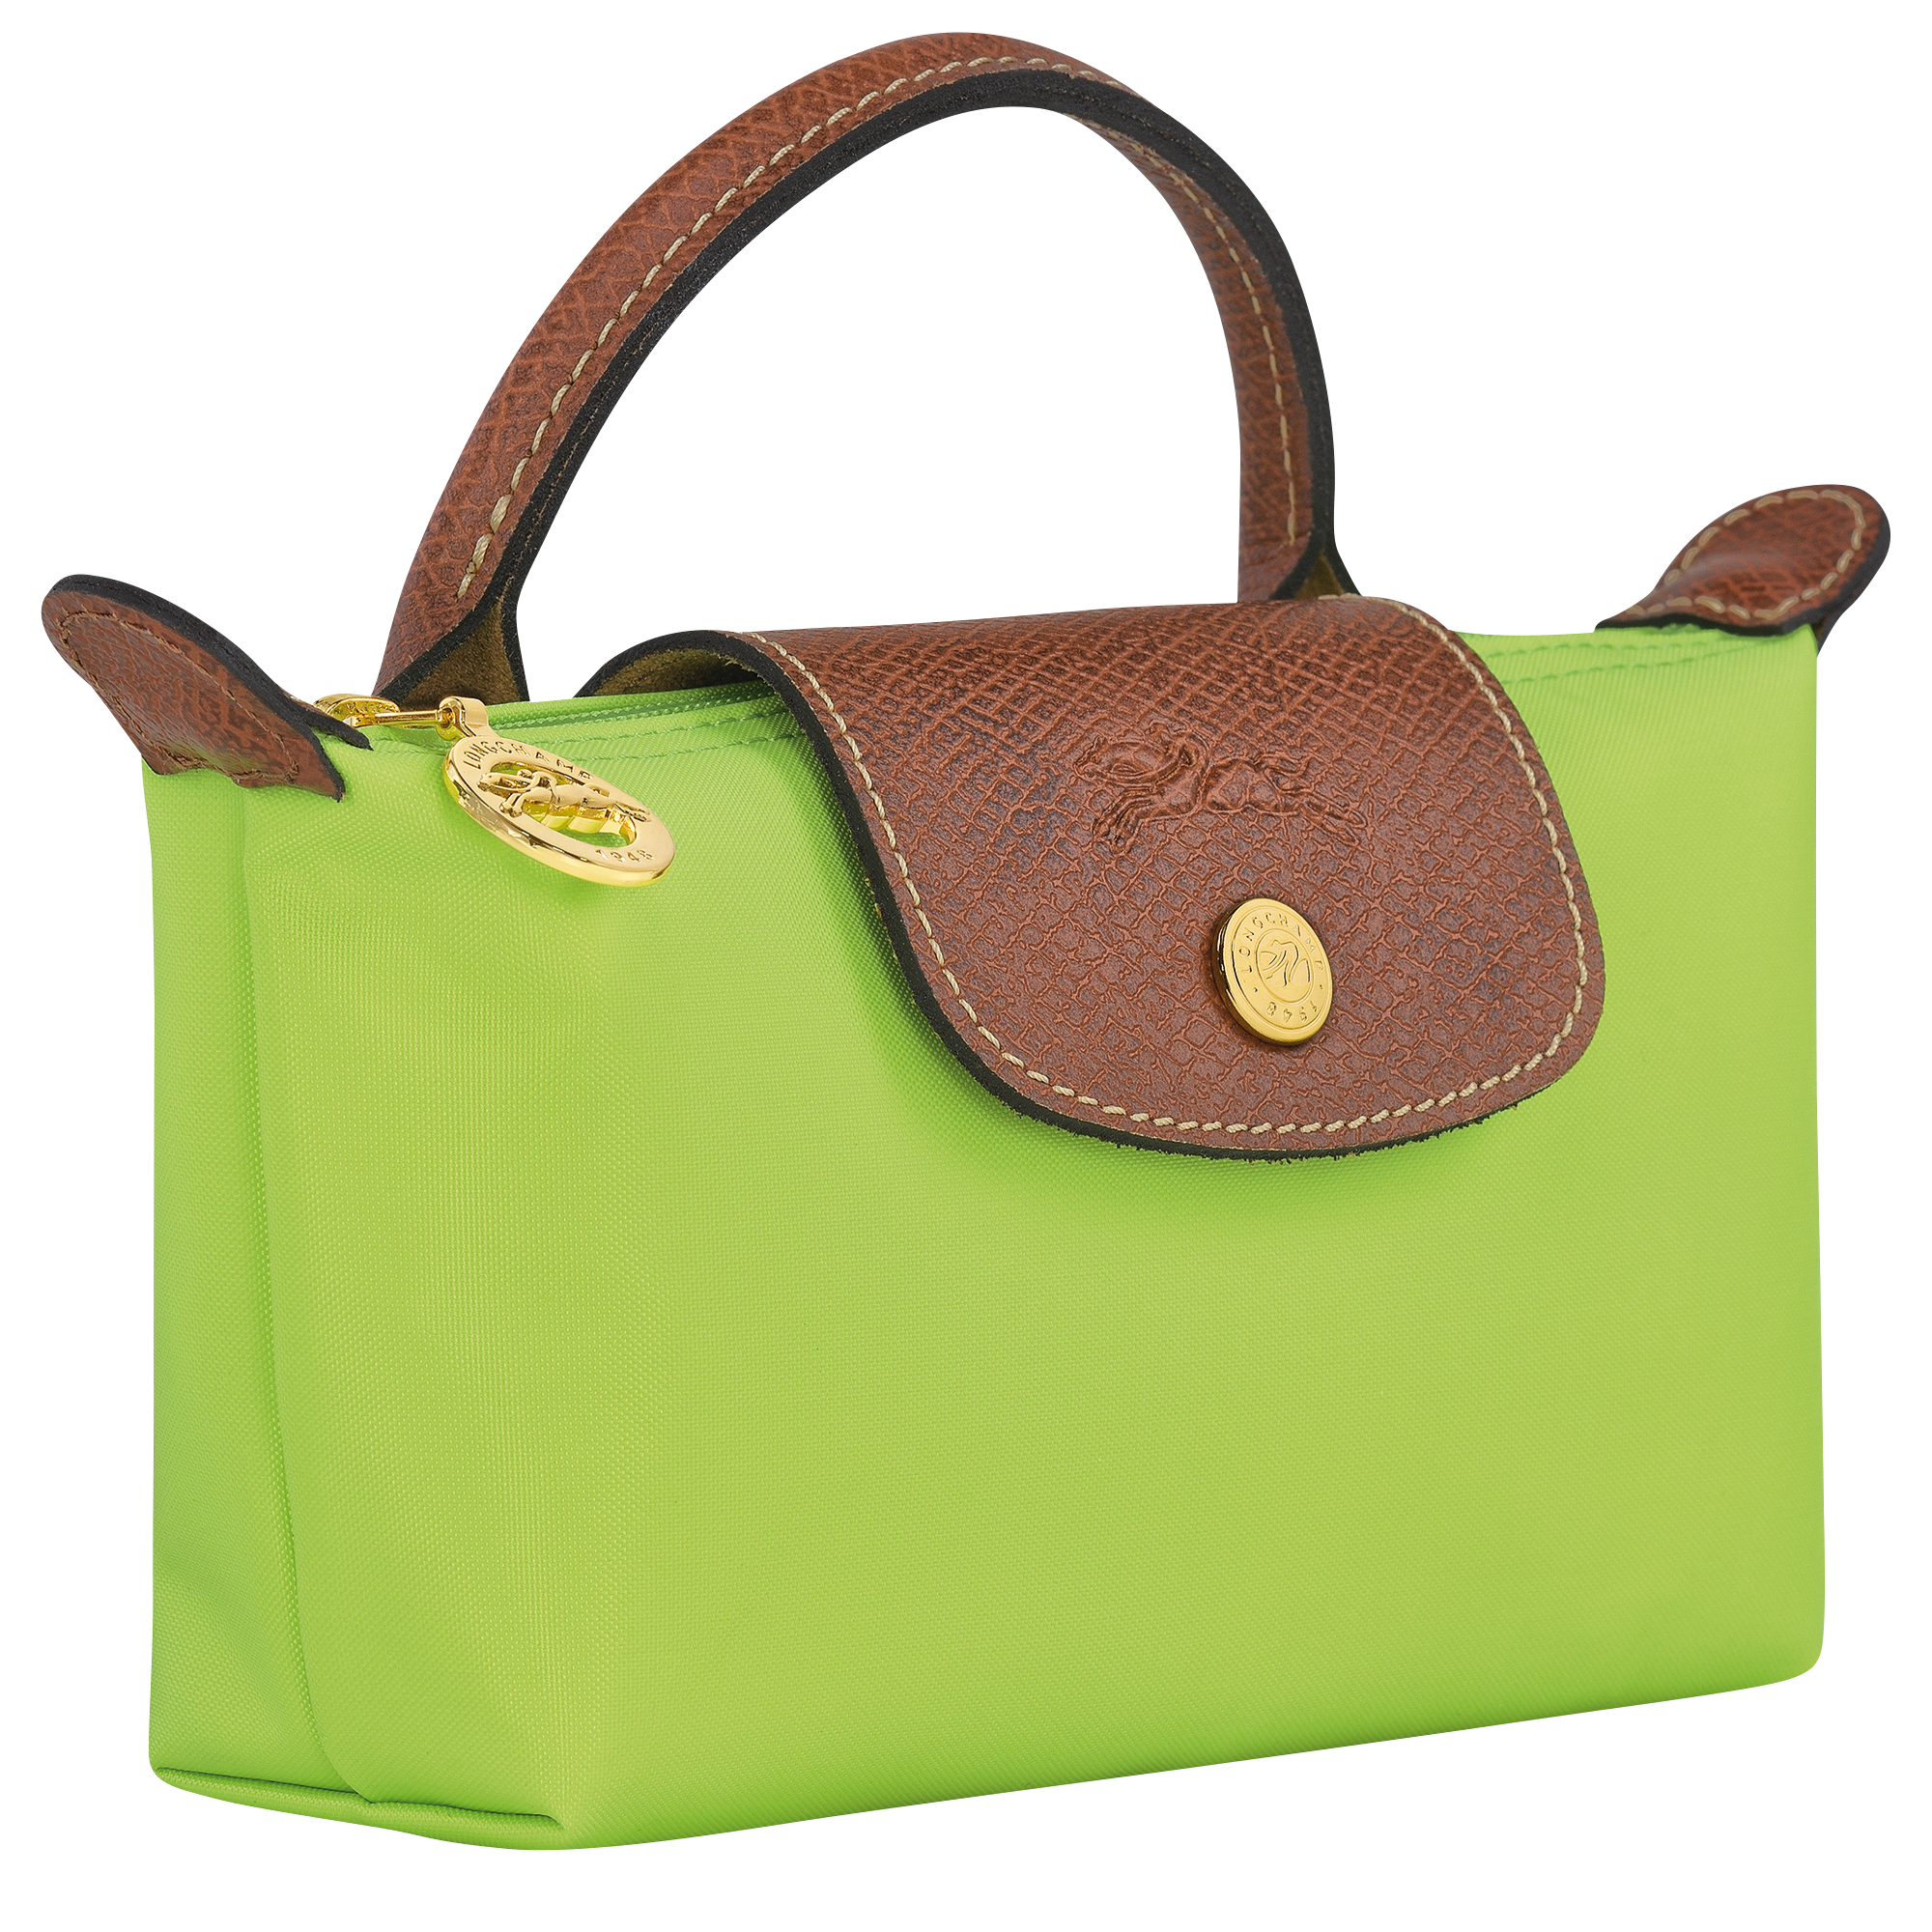 Longchamp LE PLIAGE ORIGINAL - Pouch with handle in Green Light - 3 (SKU: 34175089355)